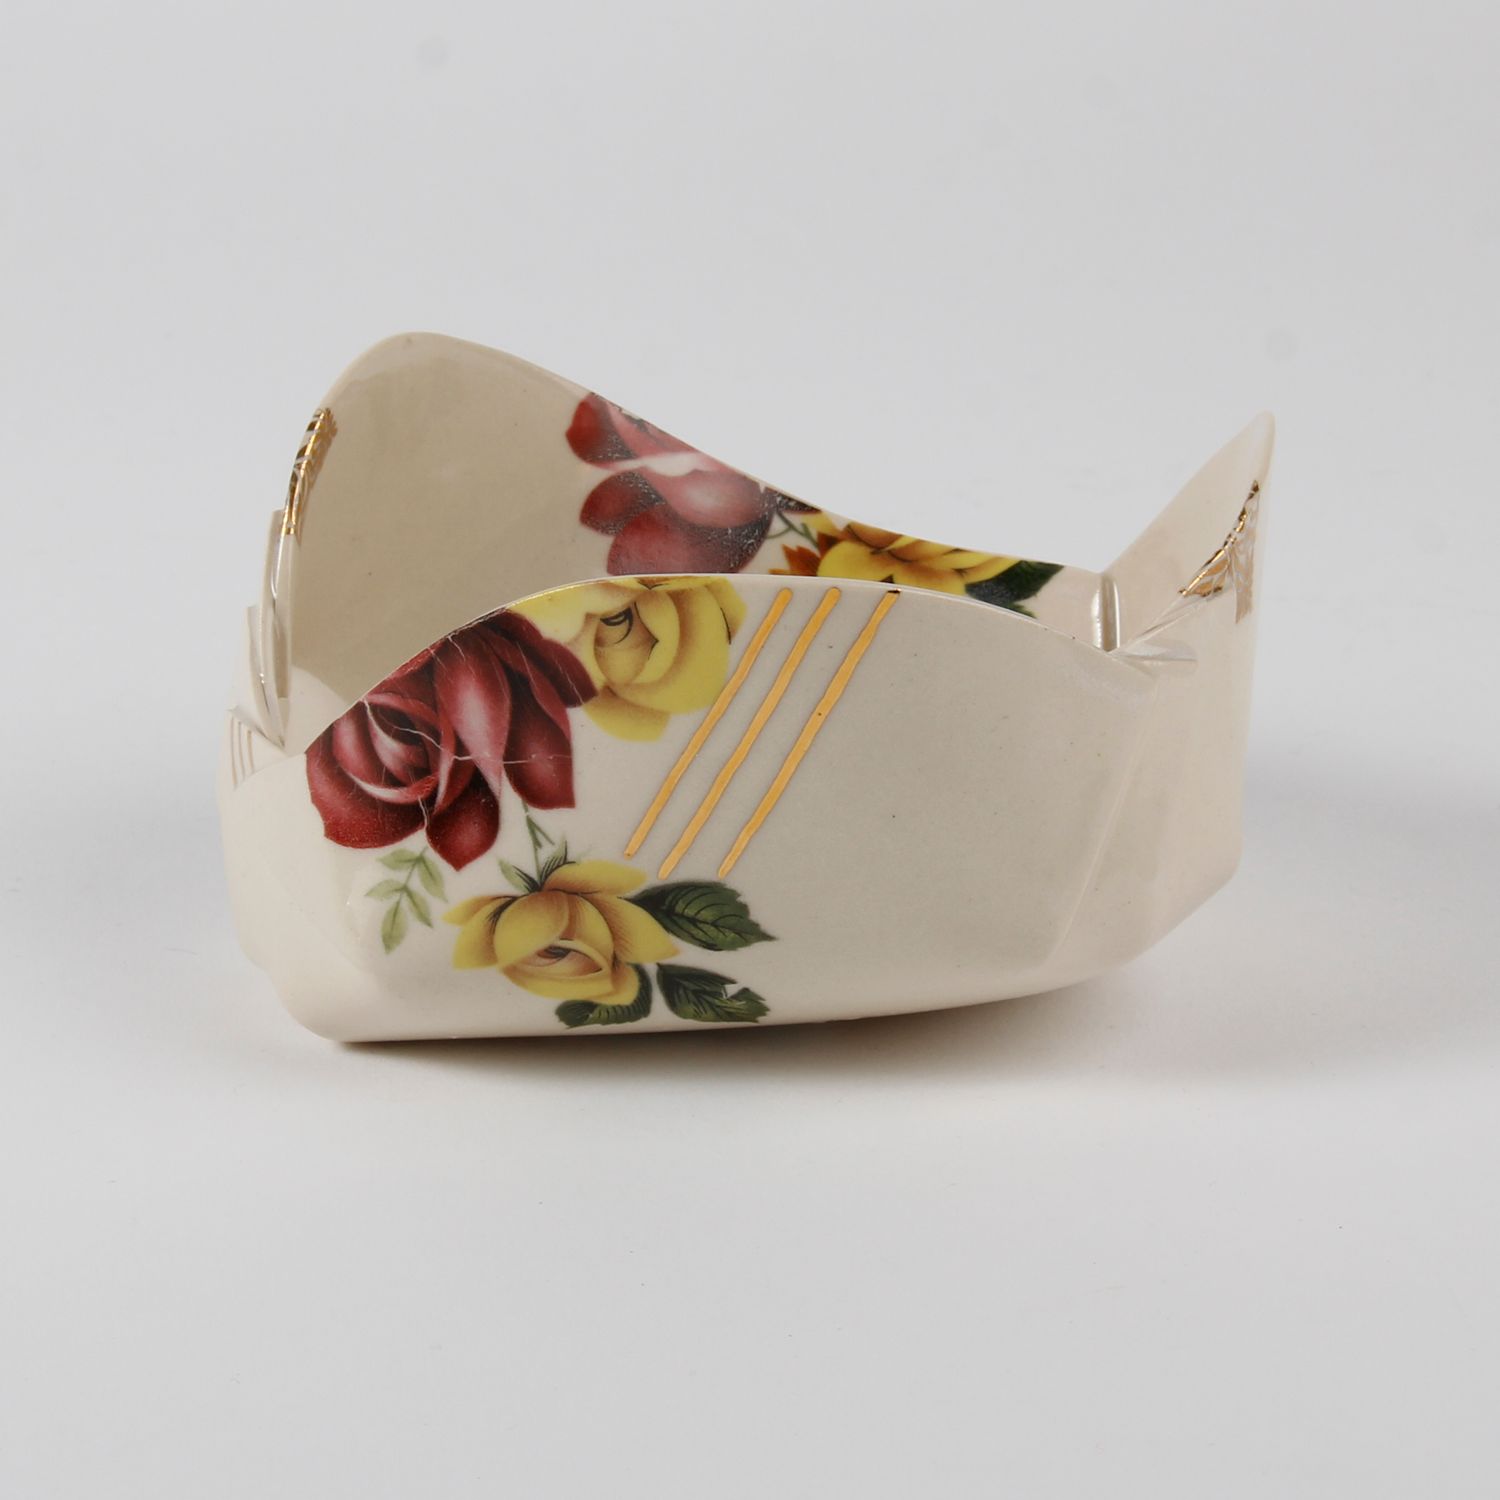 Natalie Waddell: X-Large Floral Bowl Product Image 1 of 7